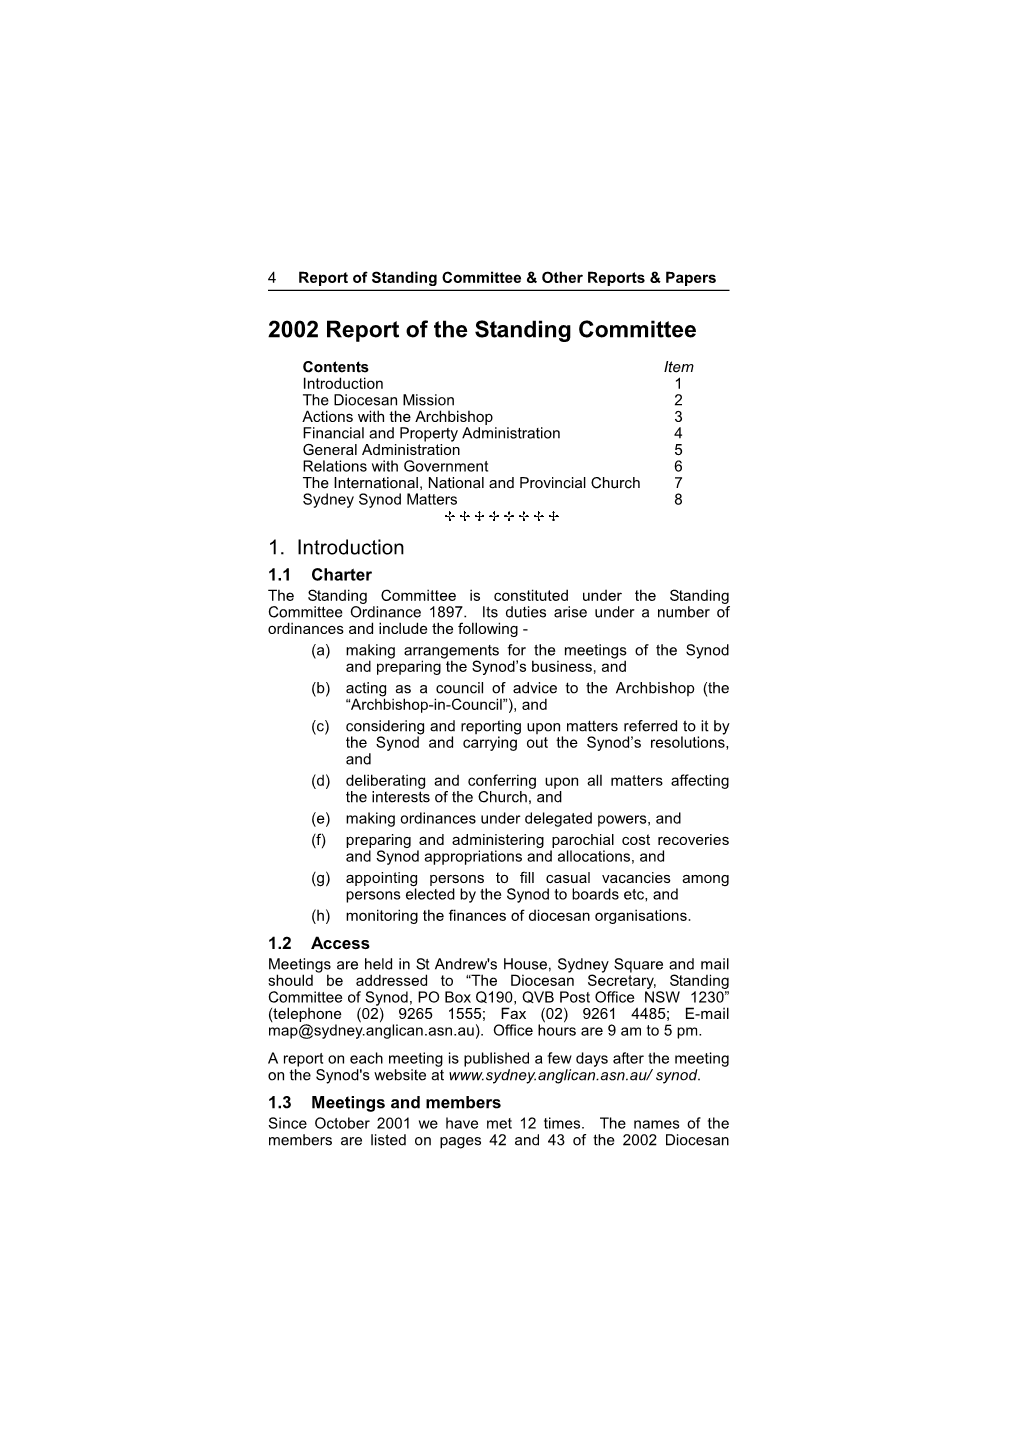 2002 Report of the Standing Committee to Synod